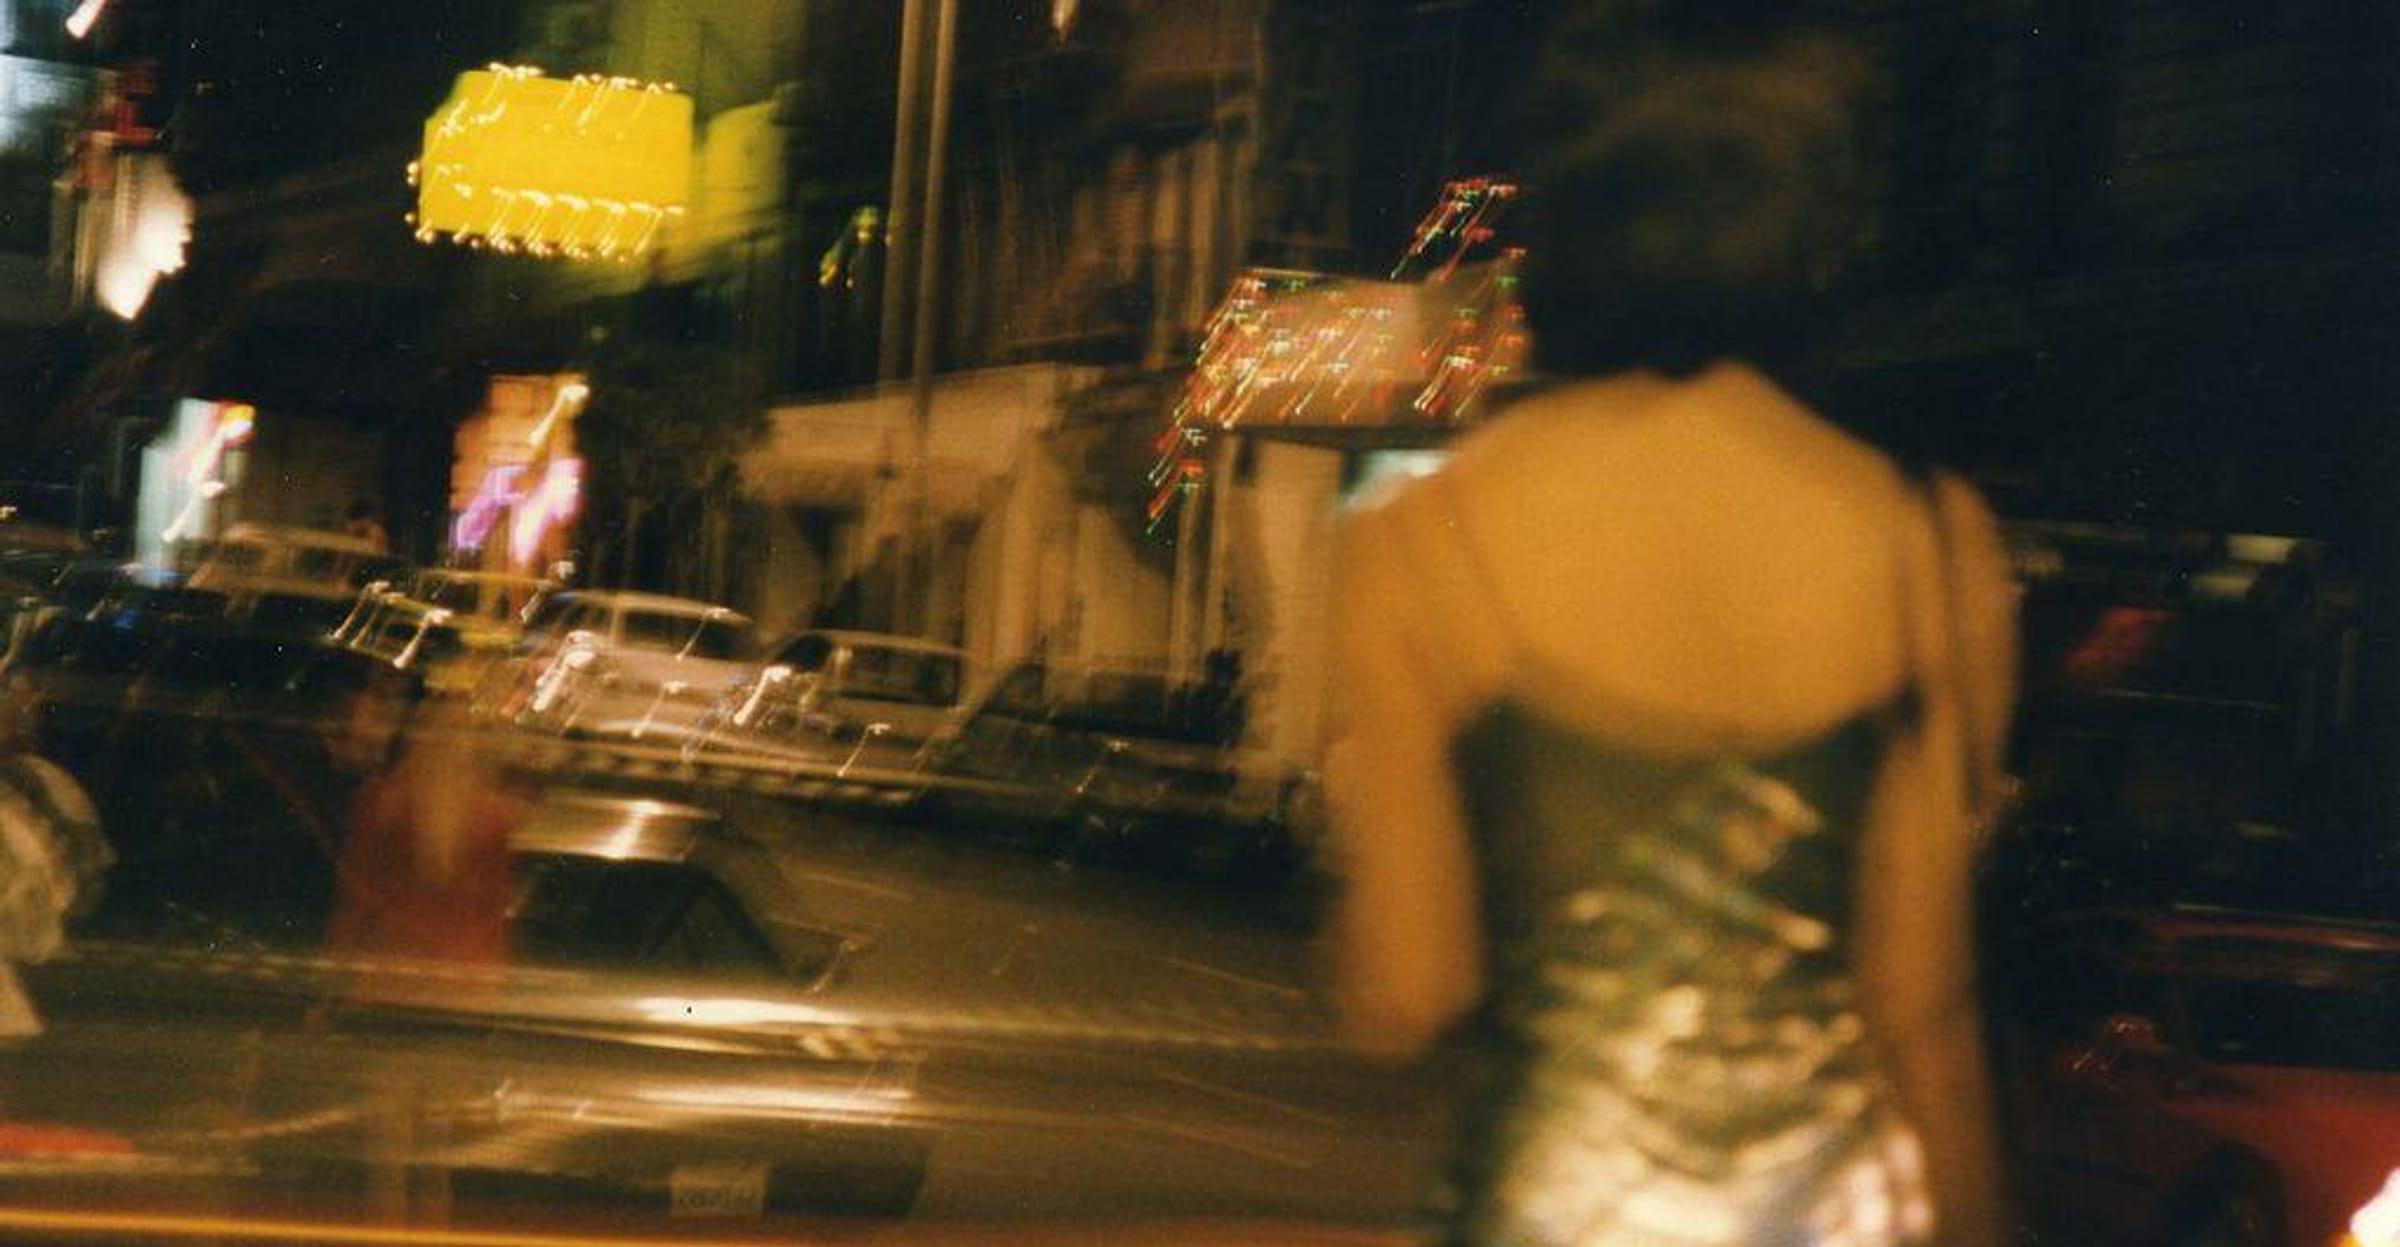 Pimps force Mexican women into prostitution in U.S.